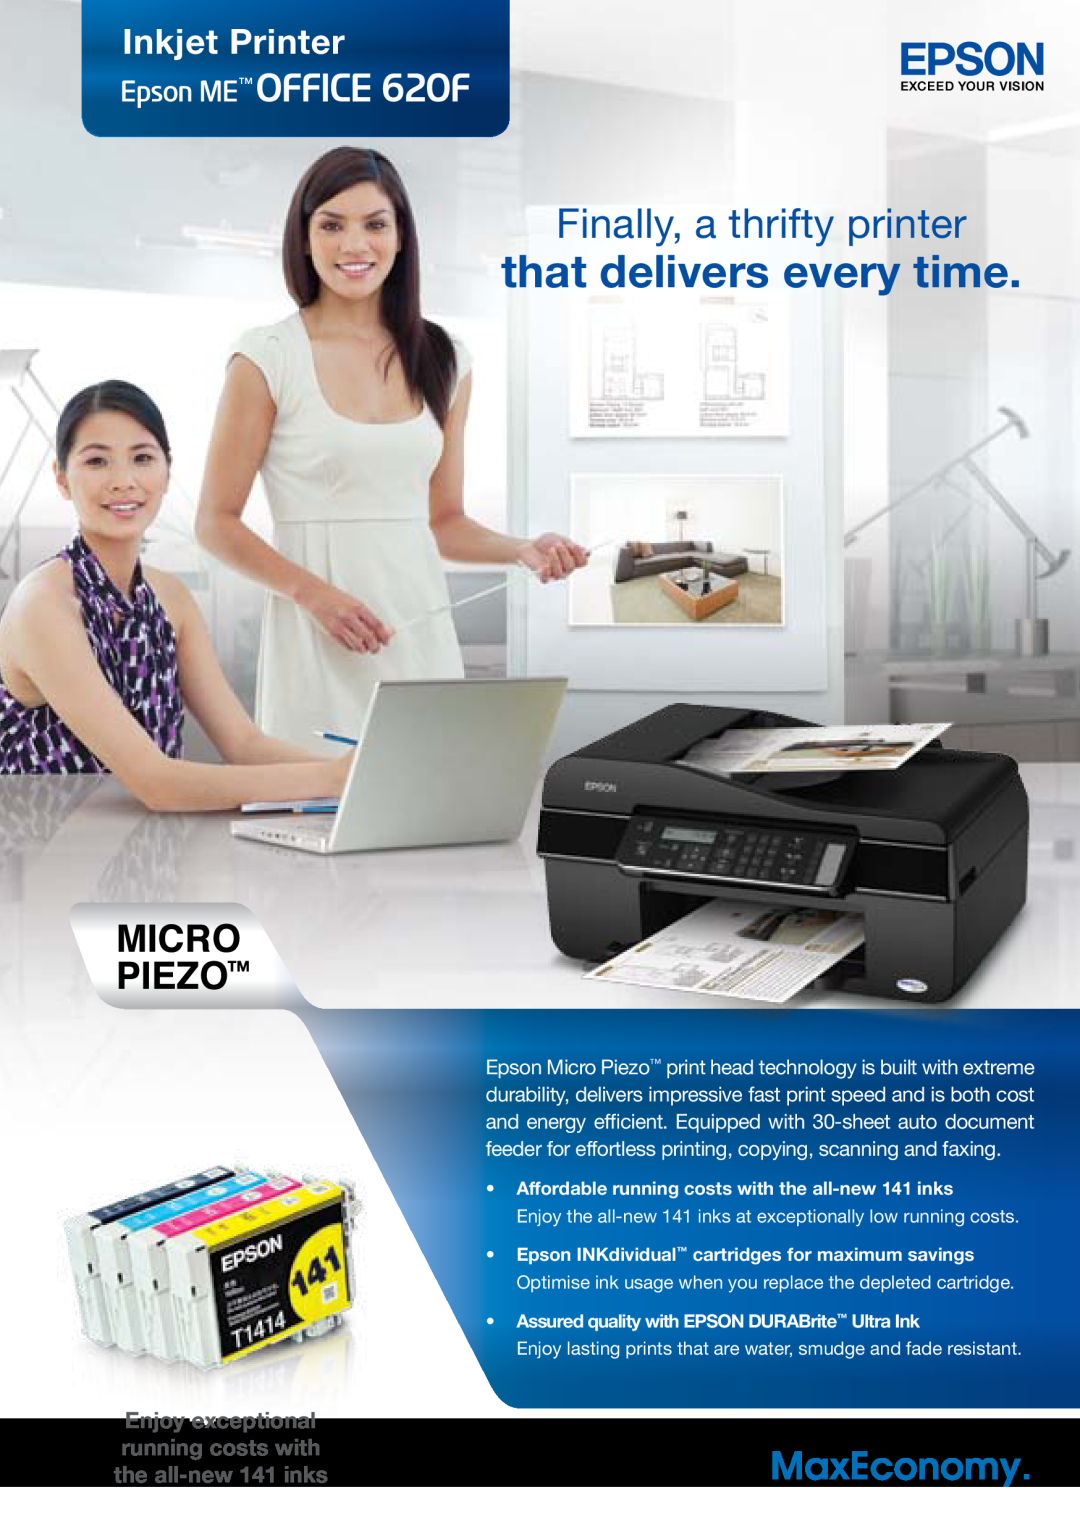 Epson 620F manual that delivers every time, Finally, a thrifty printer, Inkjet Printer 